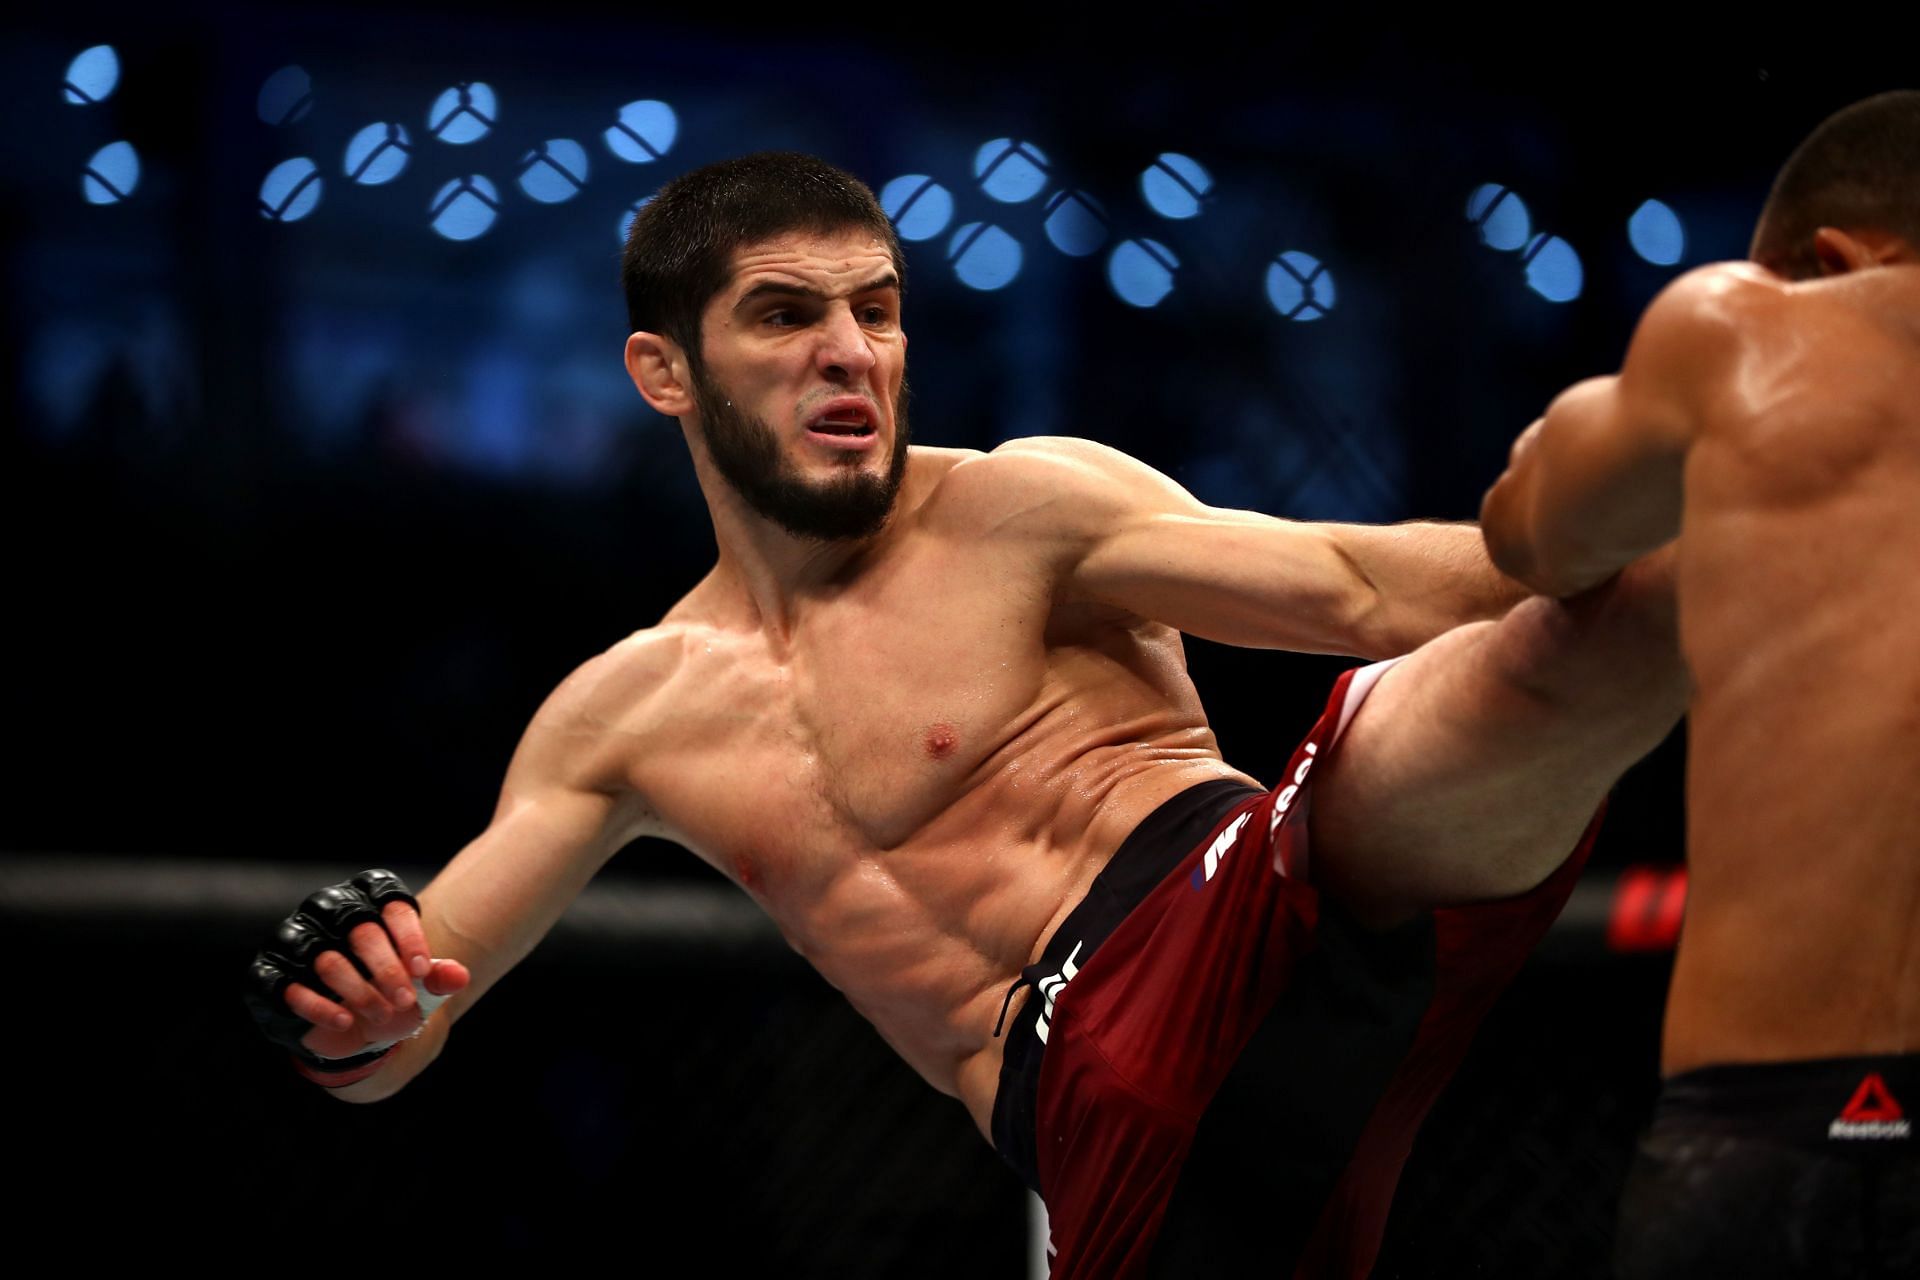 Makhachev is currently the no. 4 ranked fighter at lightweight